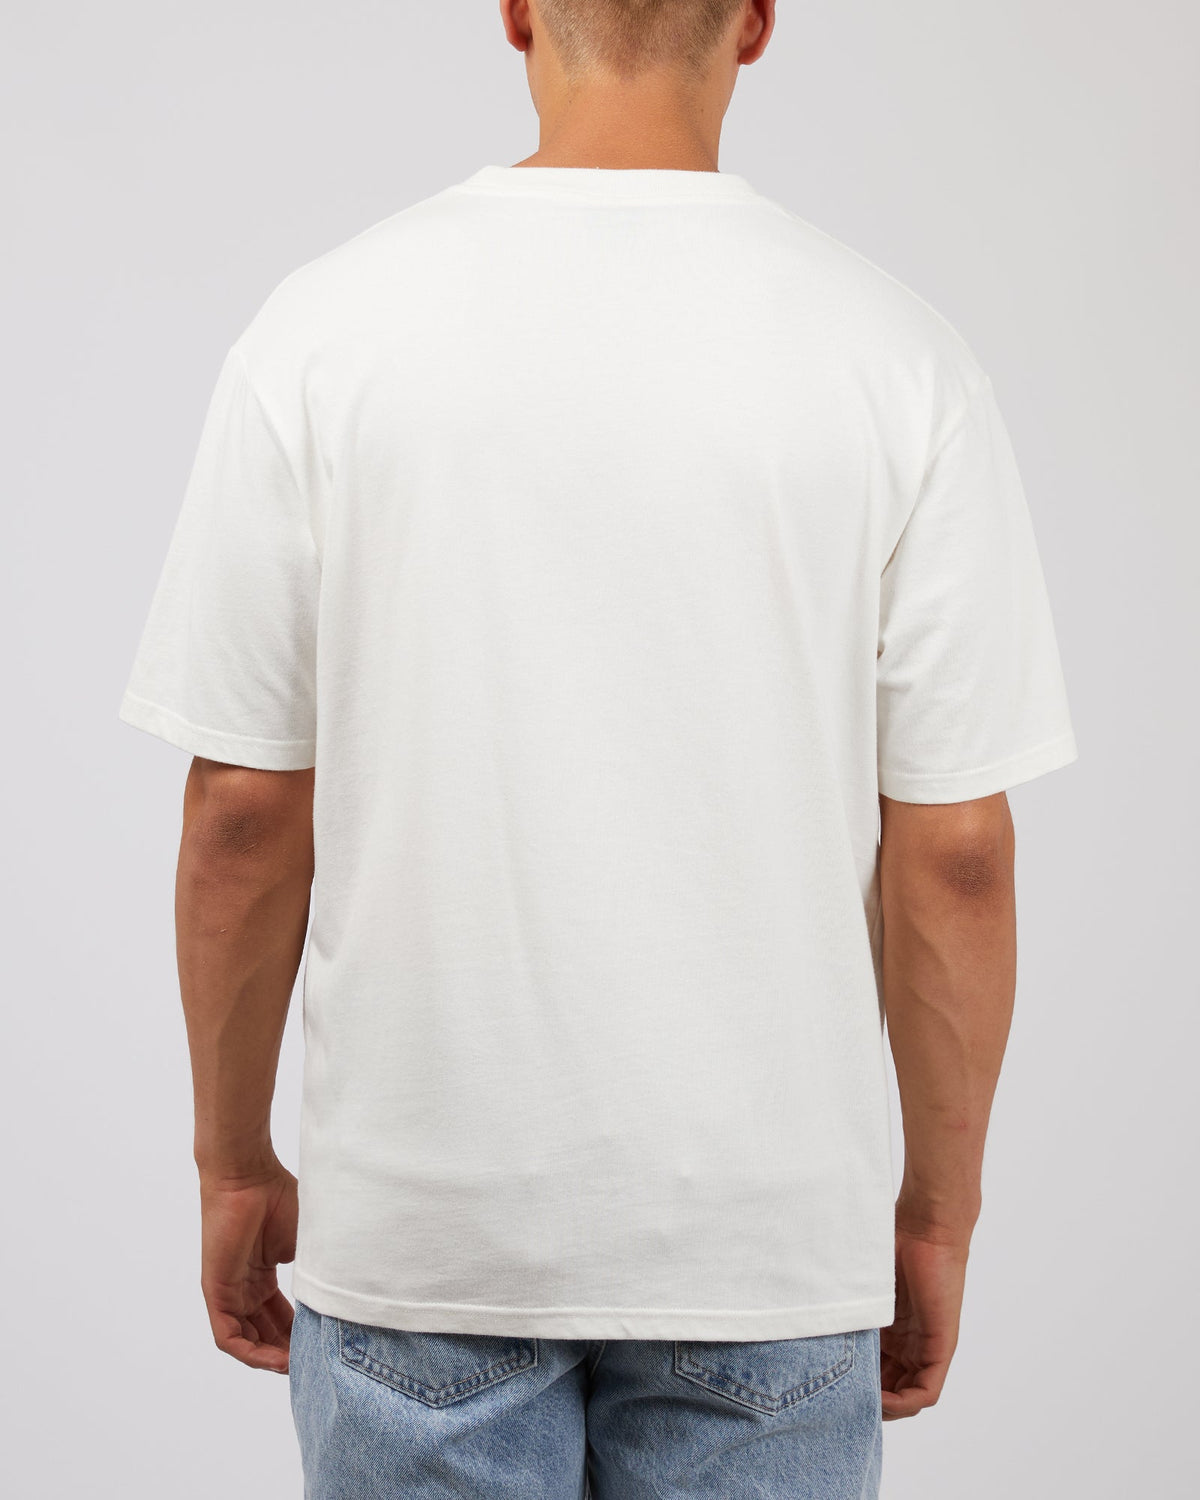 Lee-Business Baggy Tee Vintage White-Edge Clothing